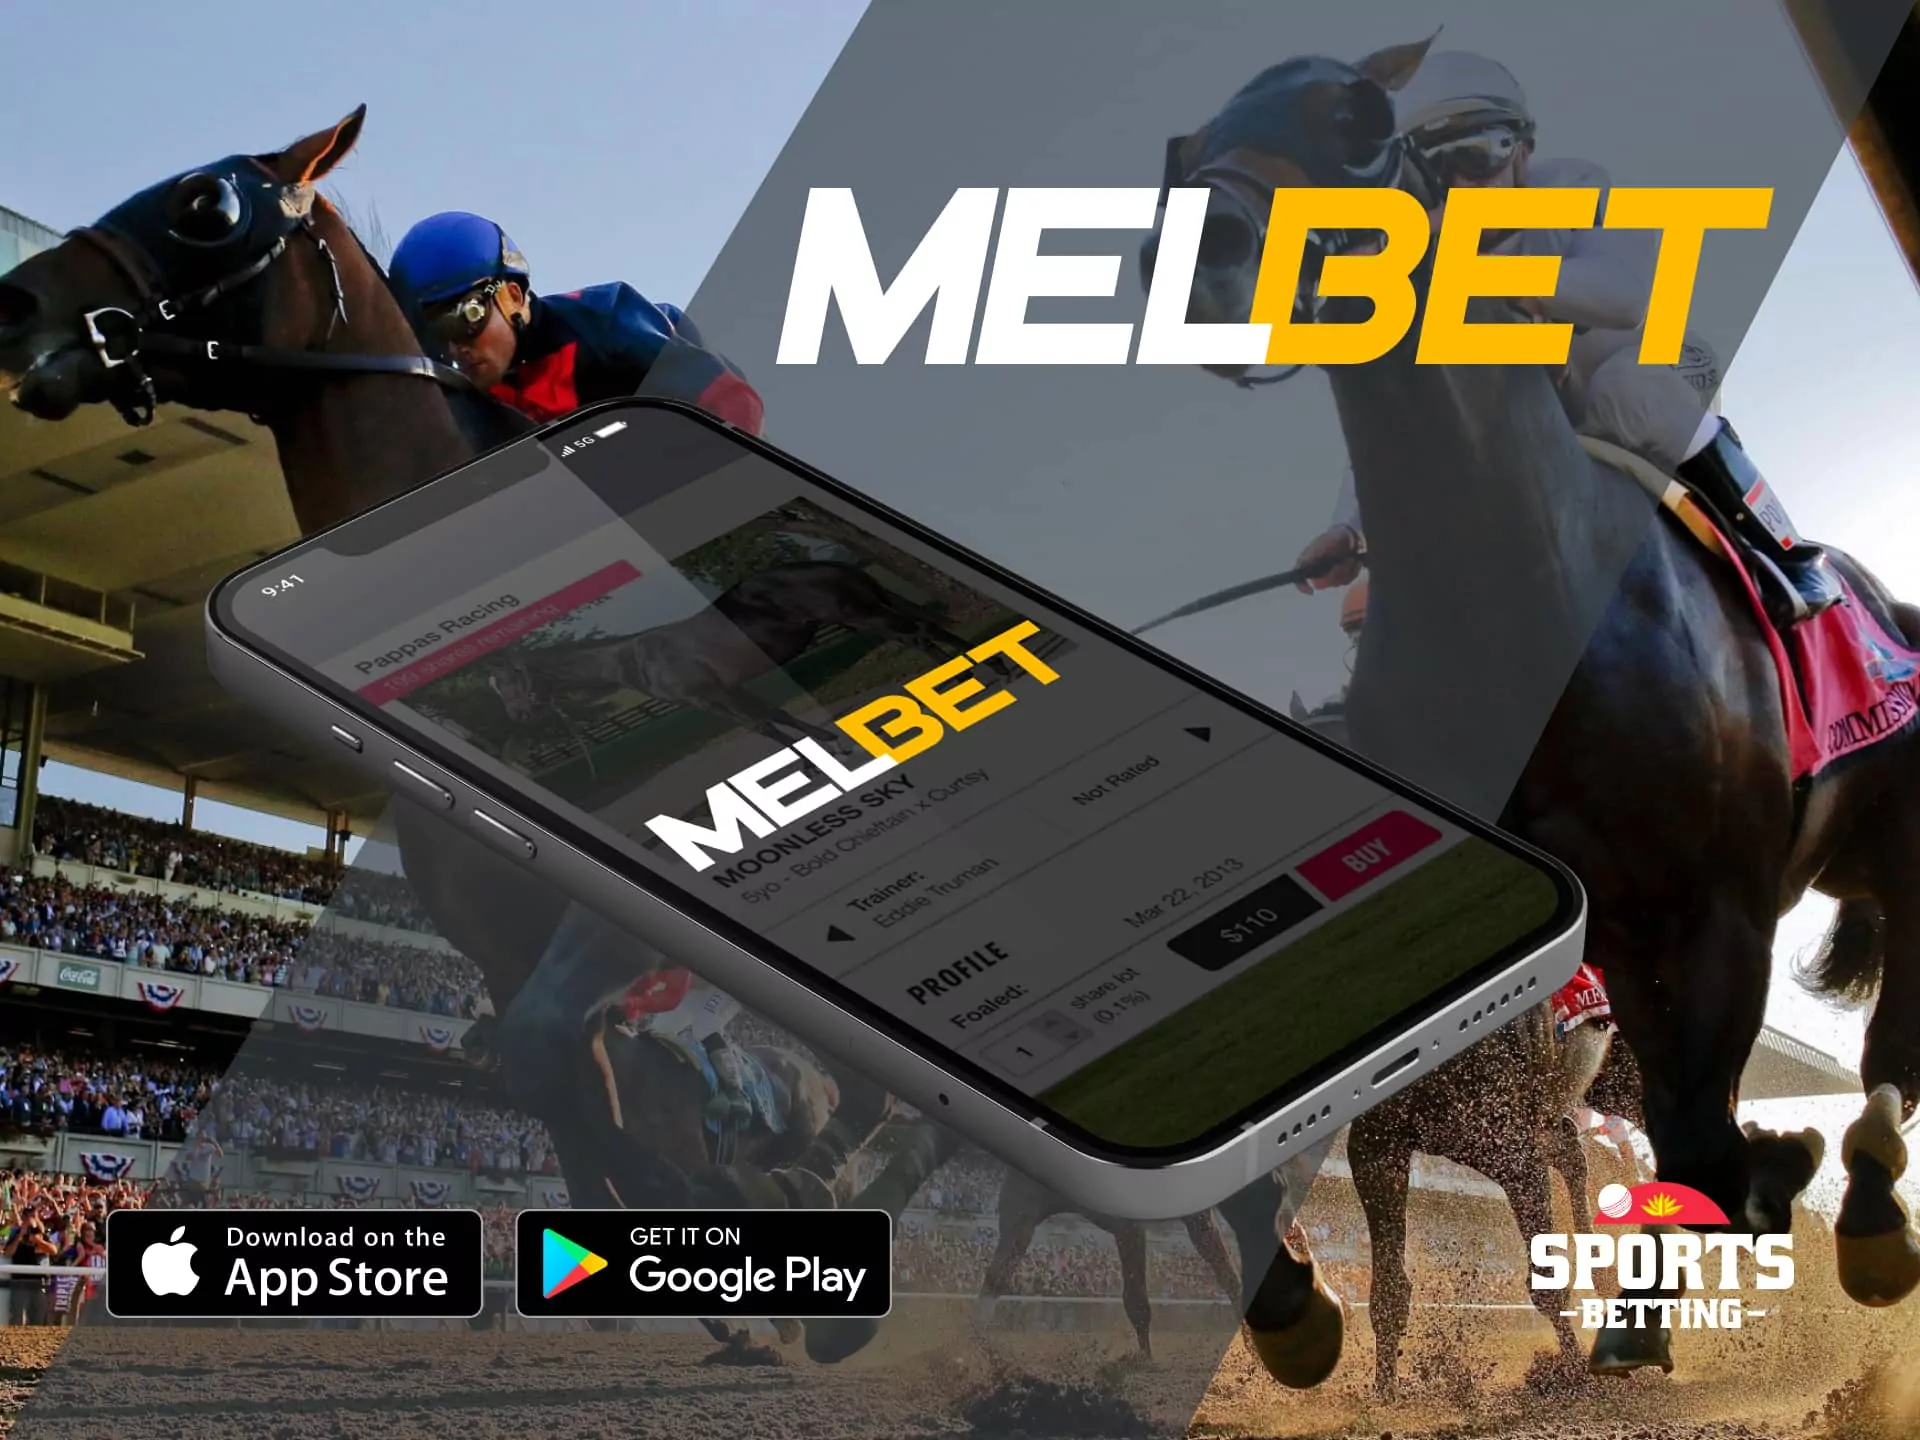 Melbet horse racing betting site with excellent minimum and maximum deposit and withdrawal limits.